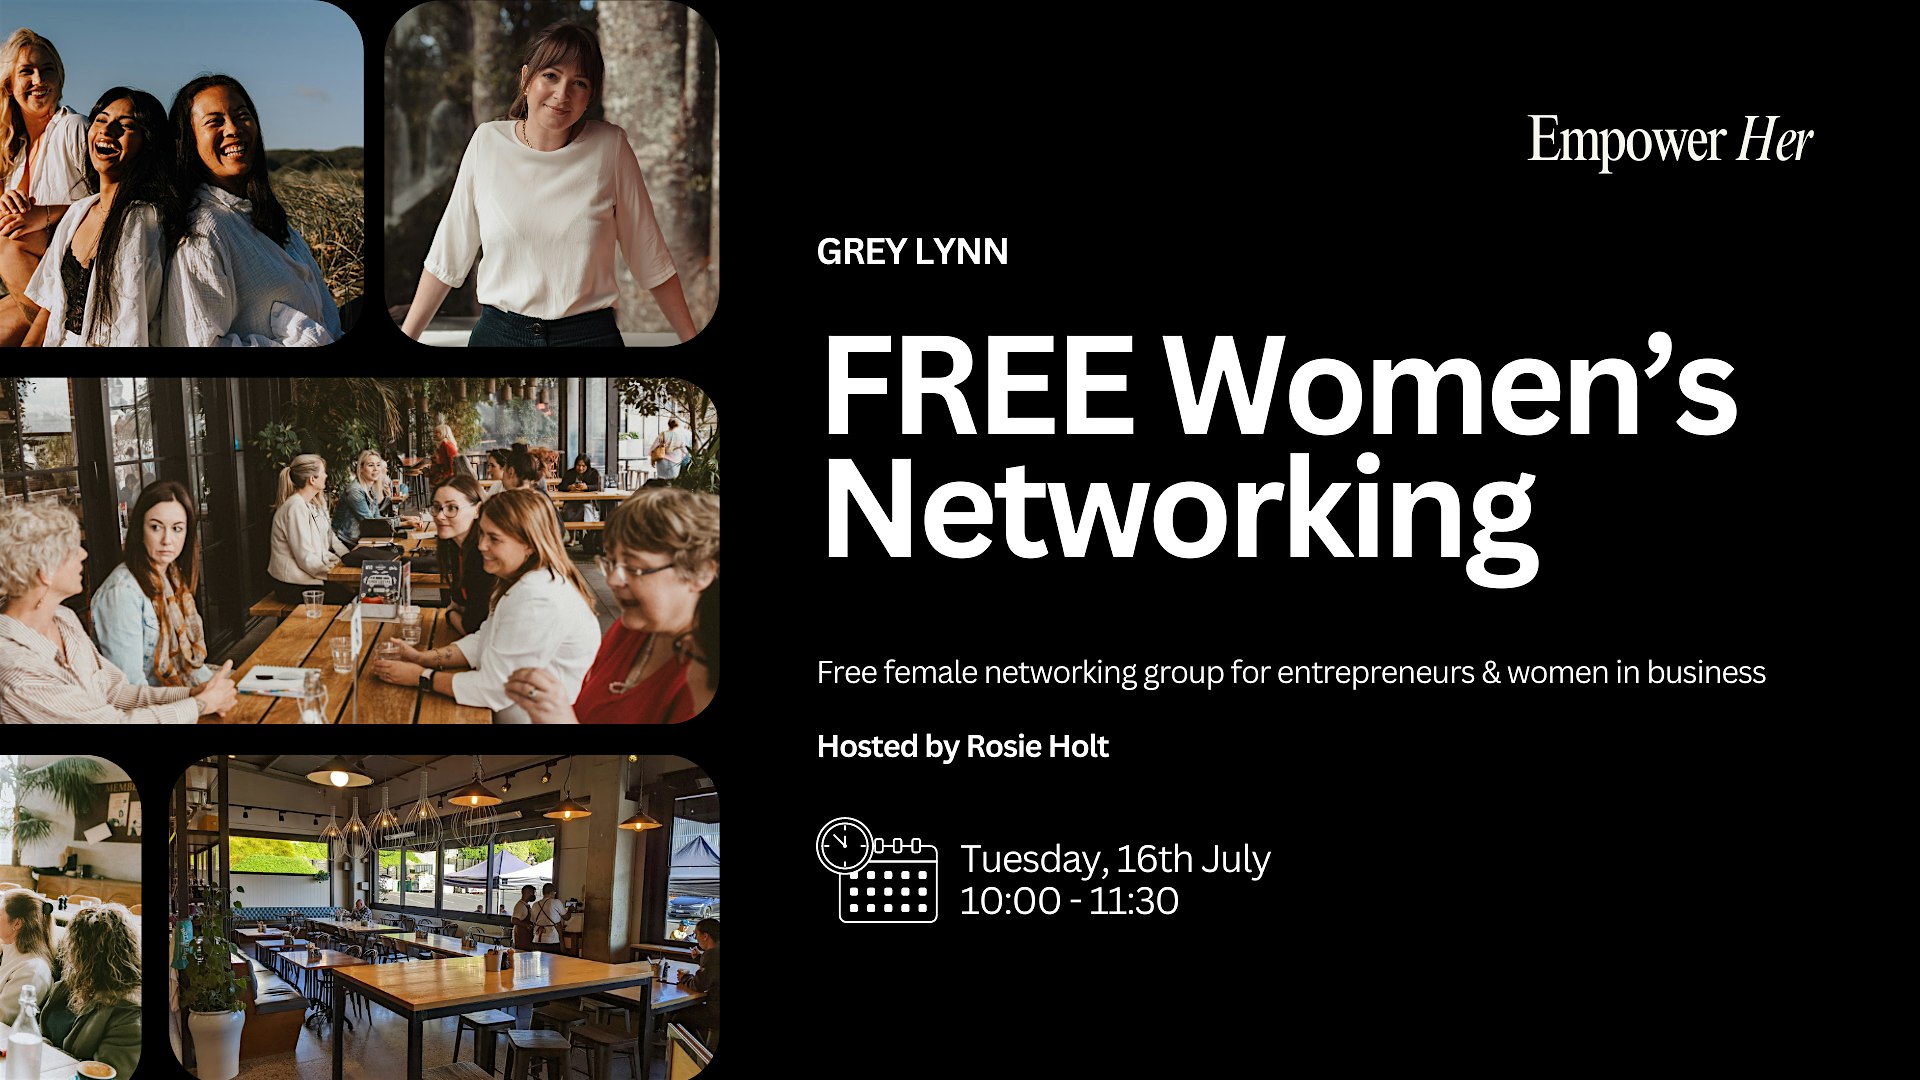 Grey Lynn - Empower Her Networking - FREE Women's Business Networking July